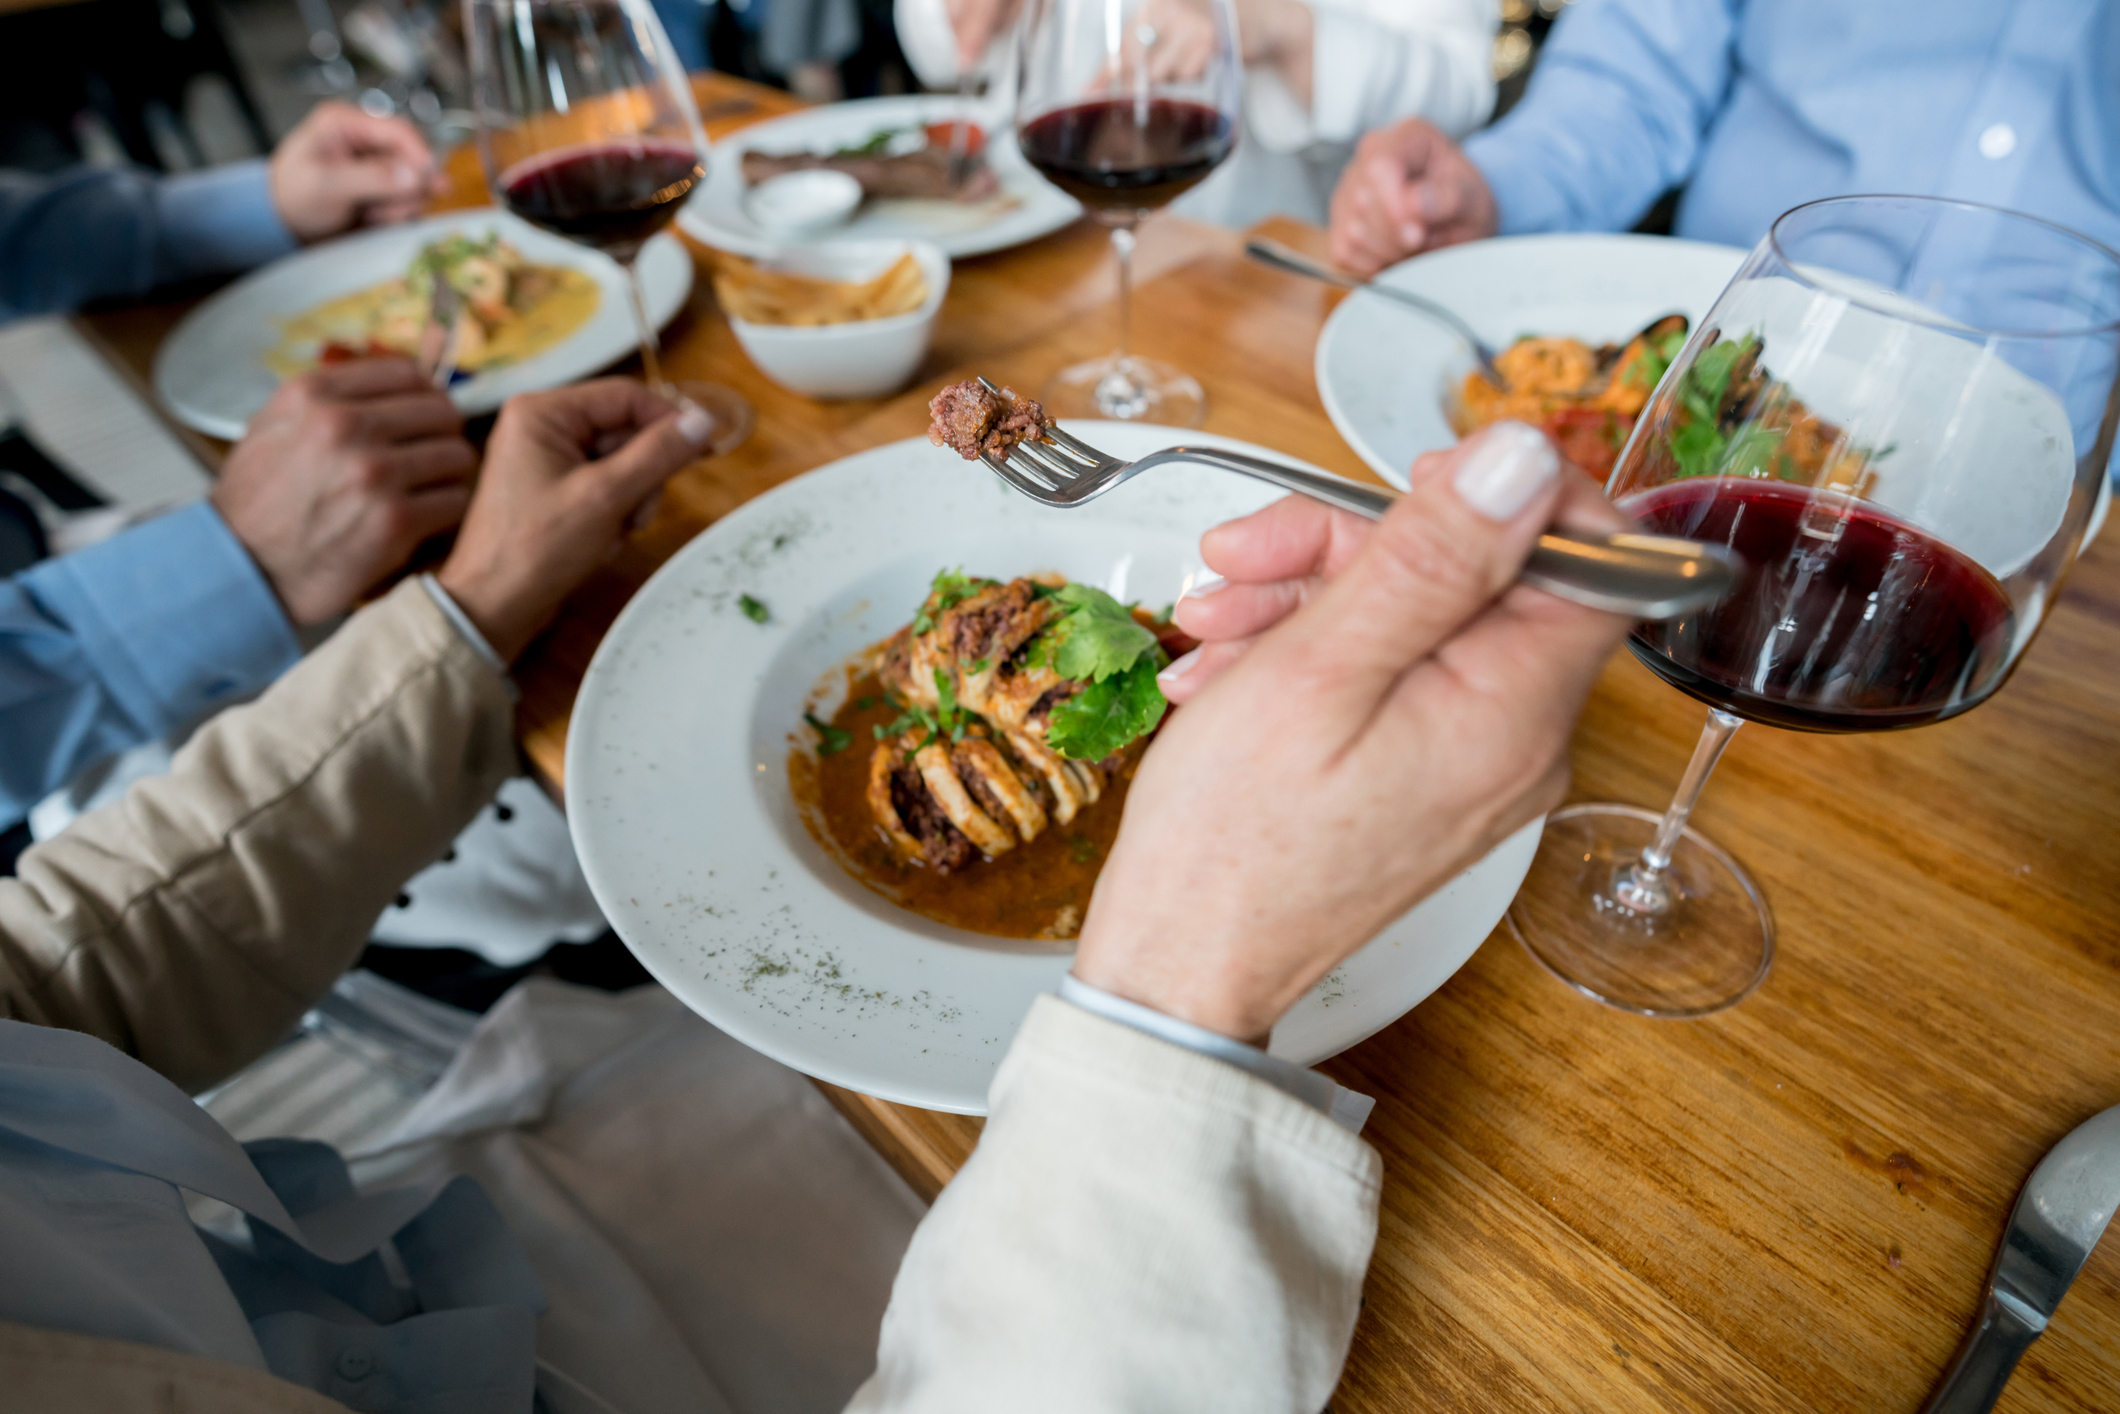 People dining at a table, close-up of hands, plates with food, and glasses of red wine